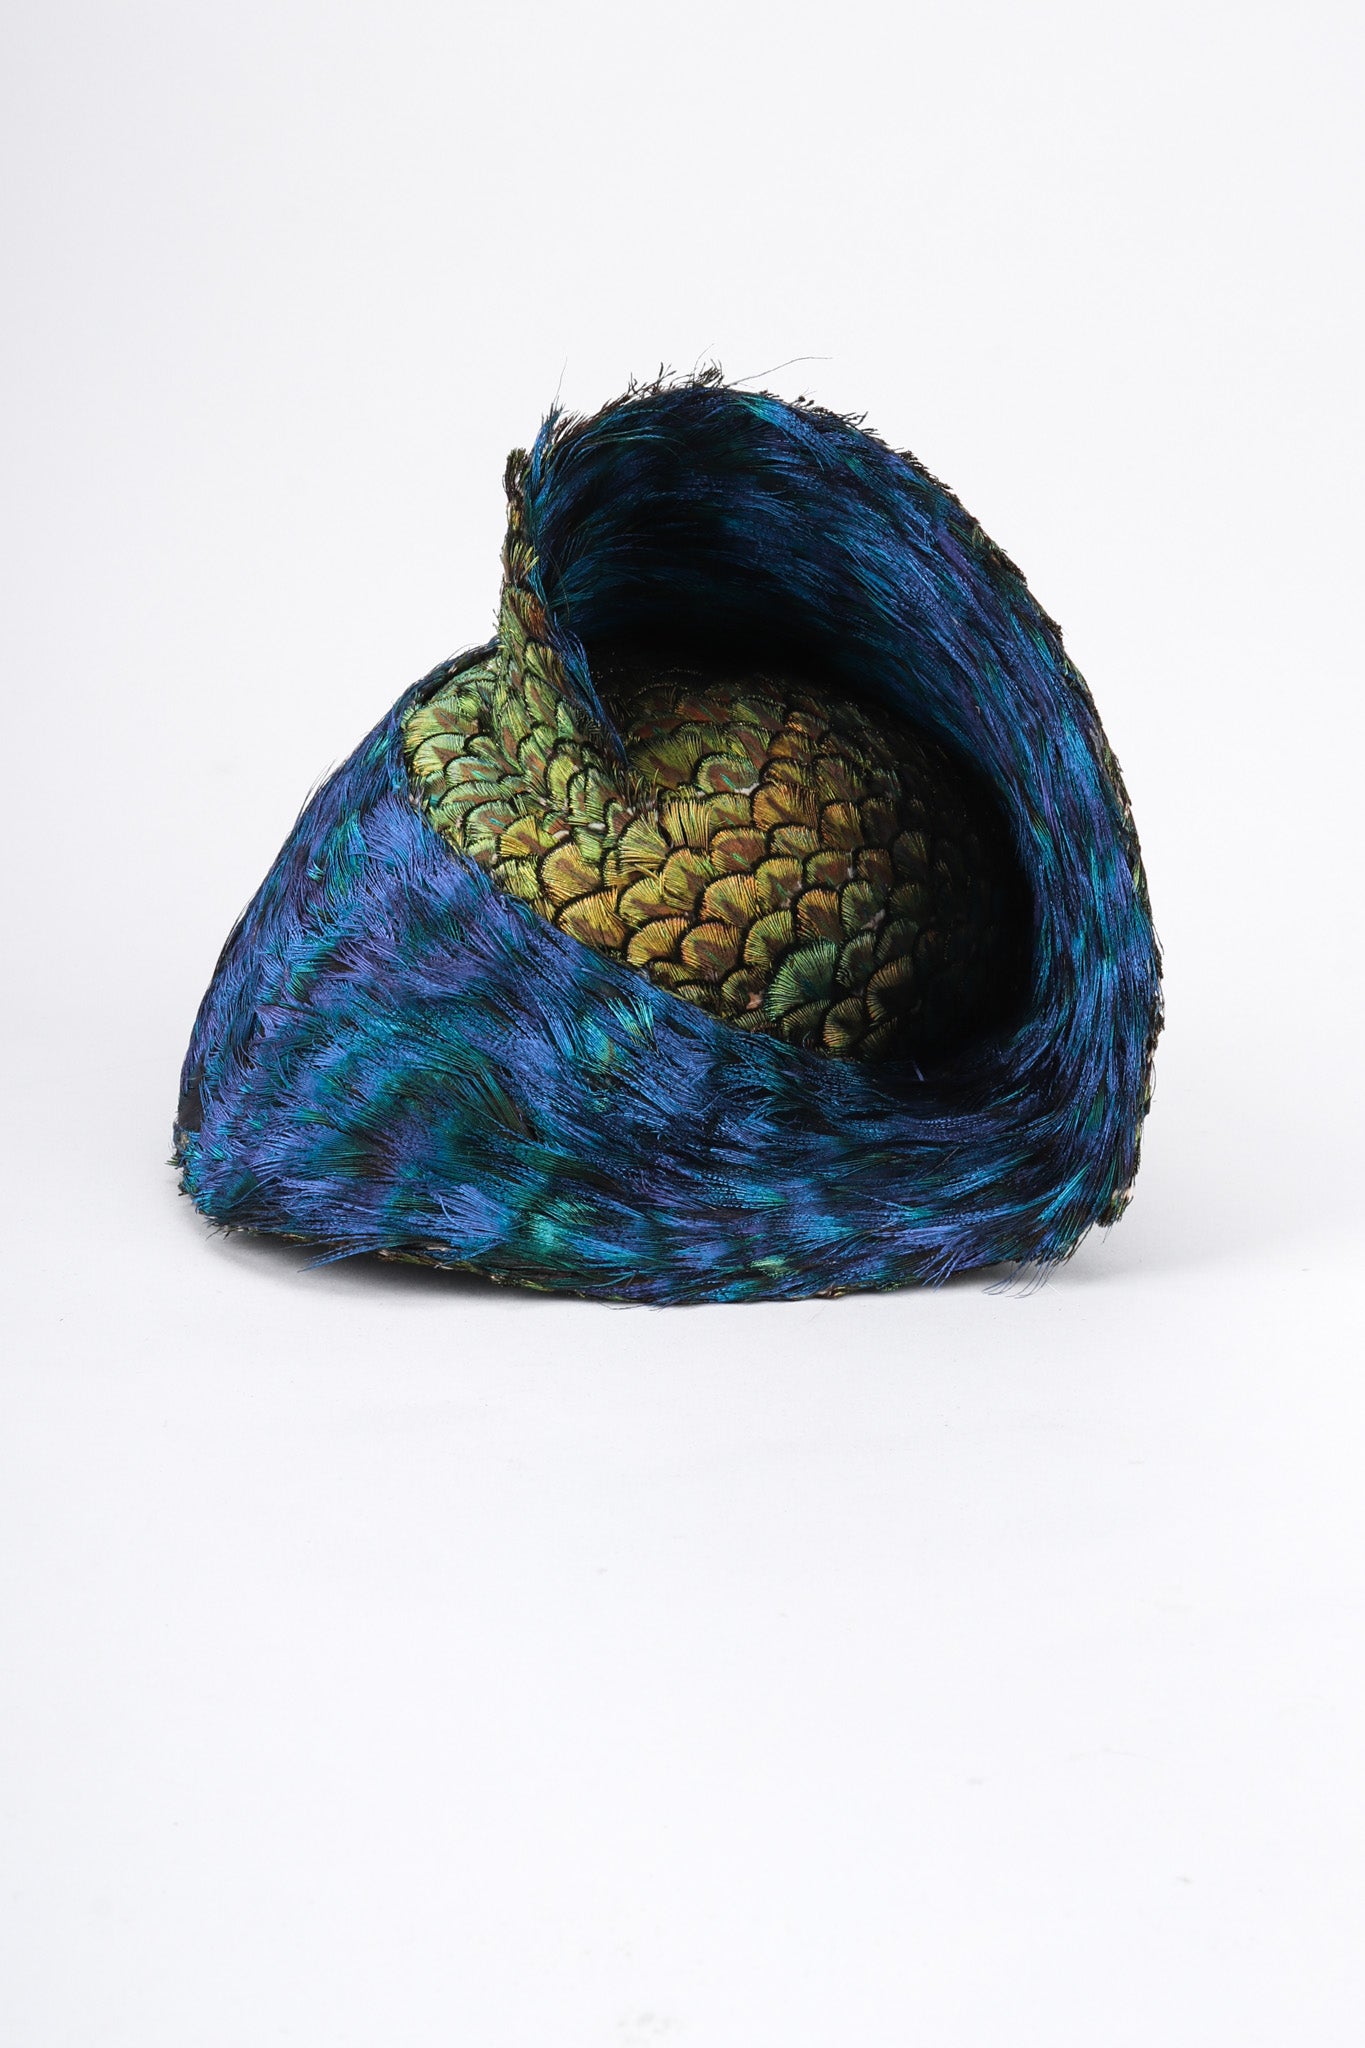 Recess Los Angeles Vintage Jack McConnell Peacock Feather Swirl Capulet Casque Fascinator Hat